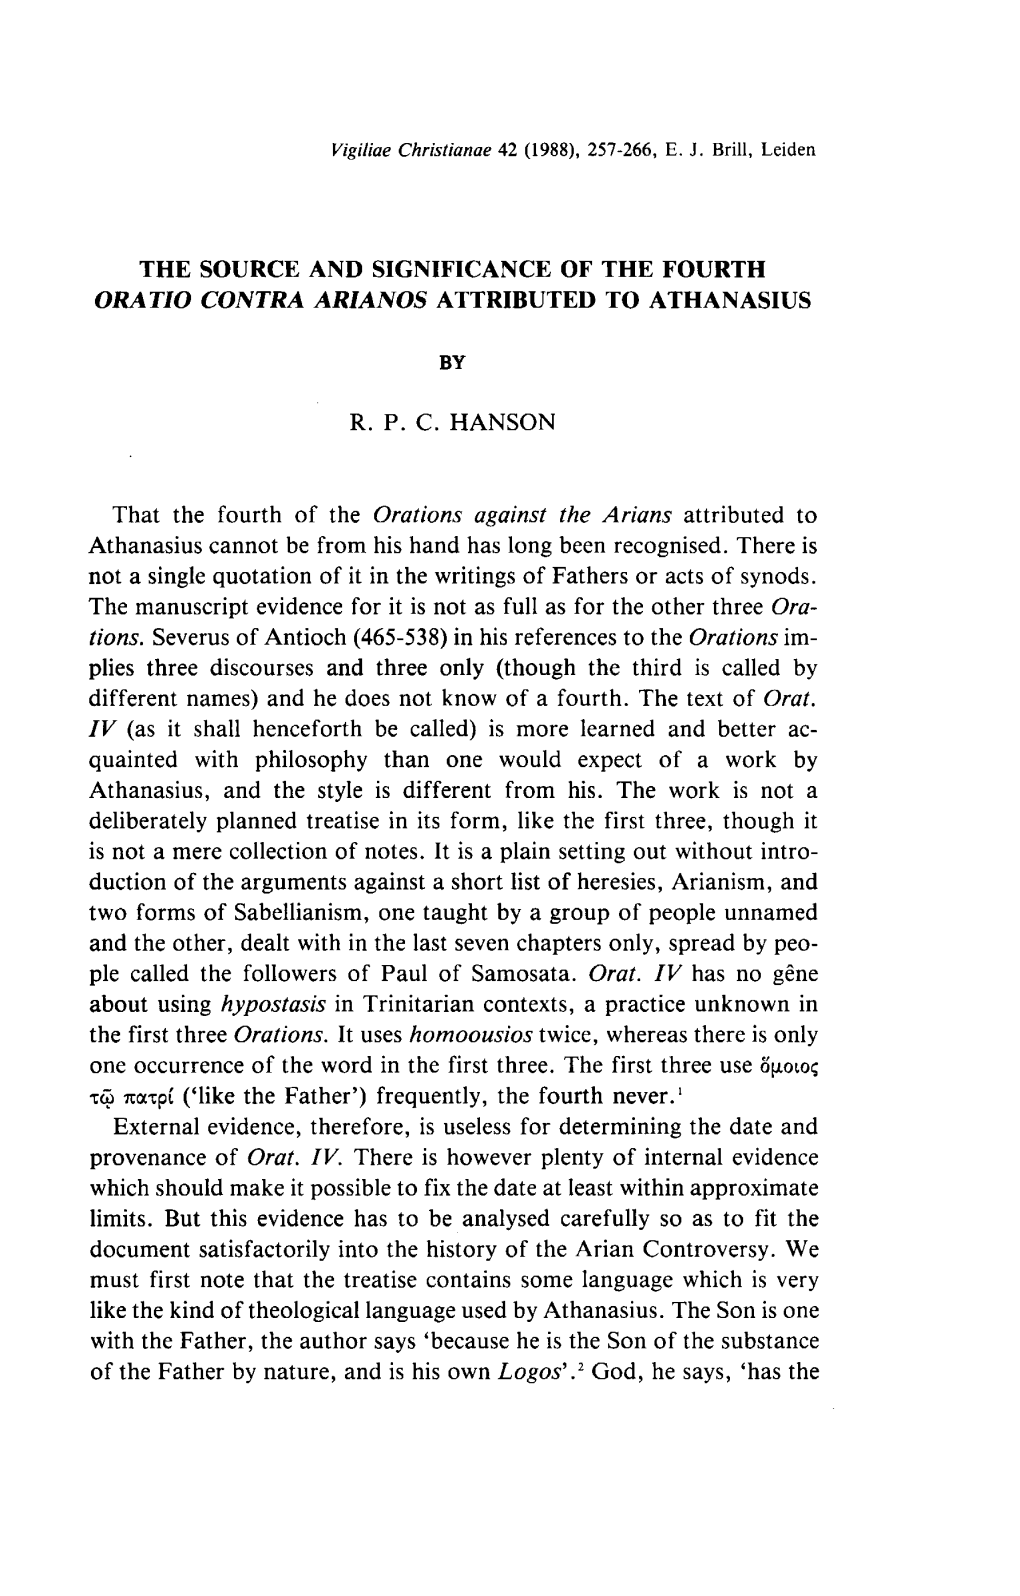 The Source and Significance of the Fourth Oratio Contra Arianos Attributed to Athanasius